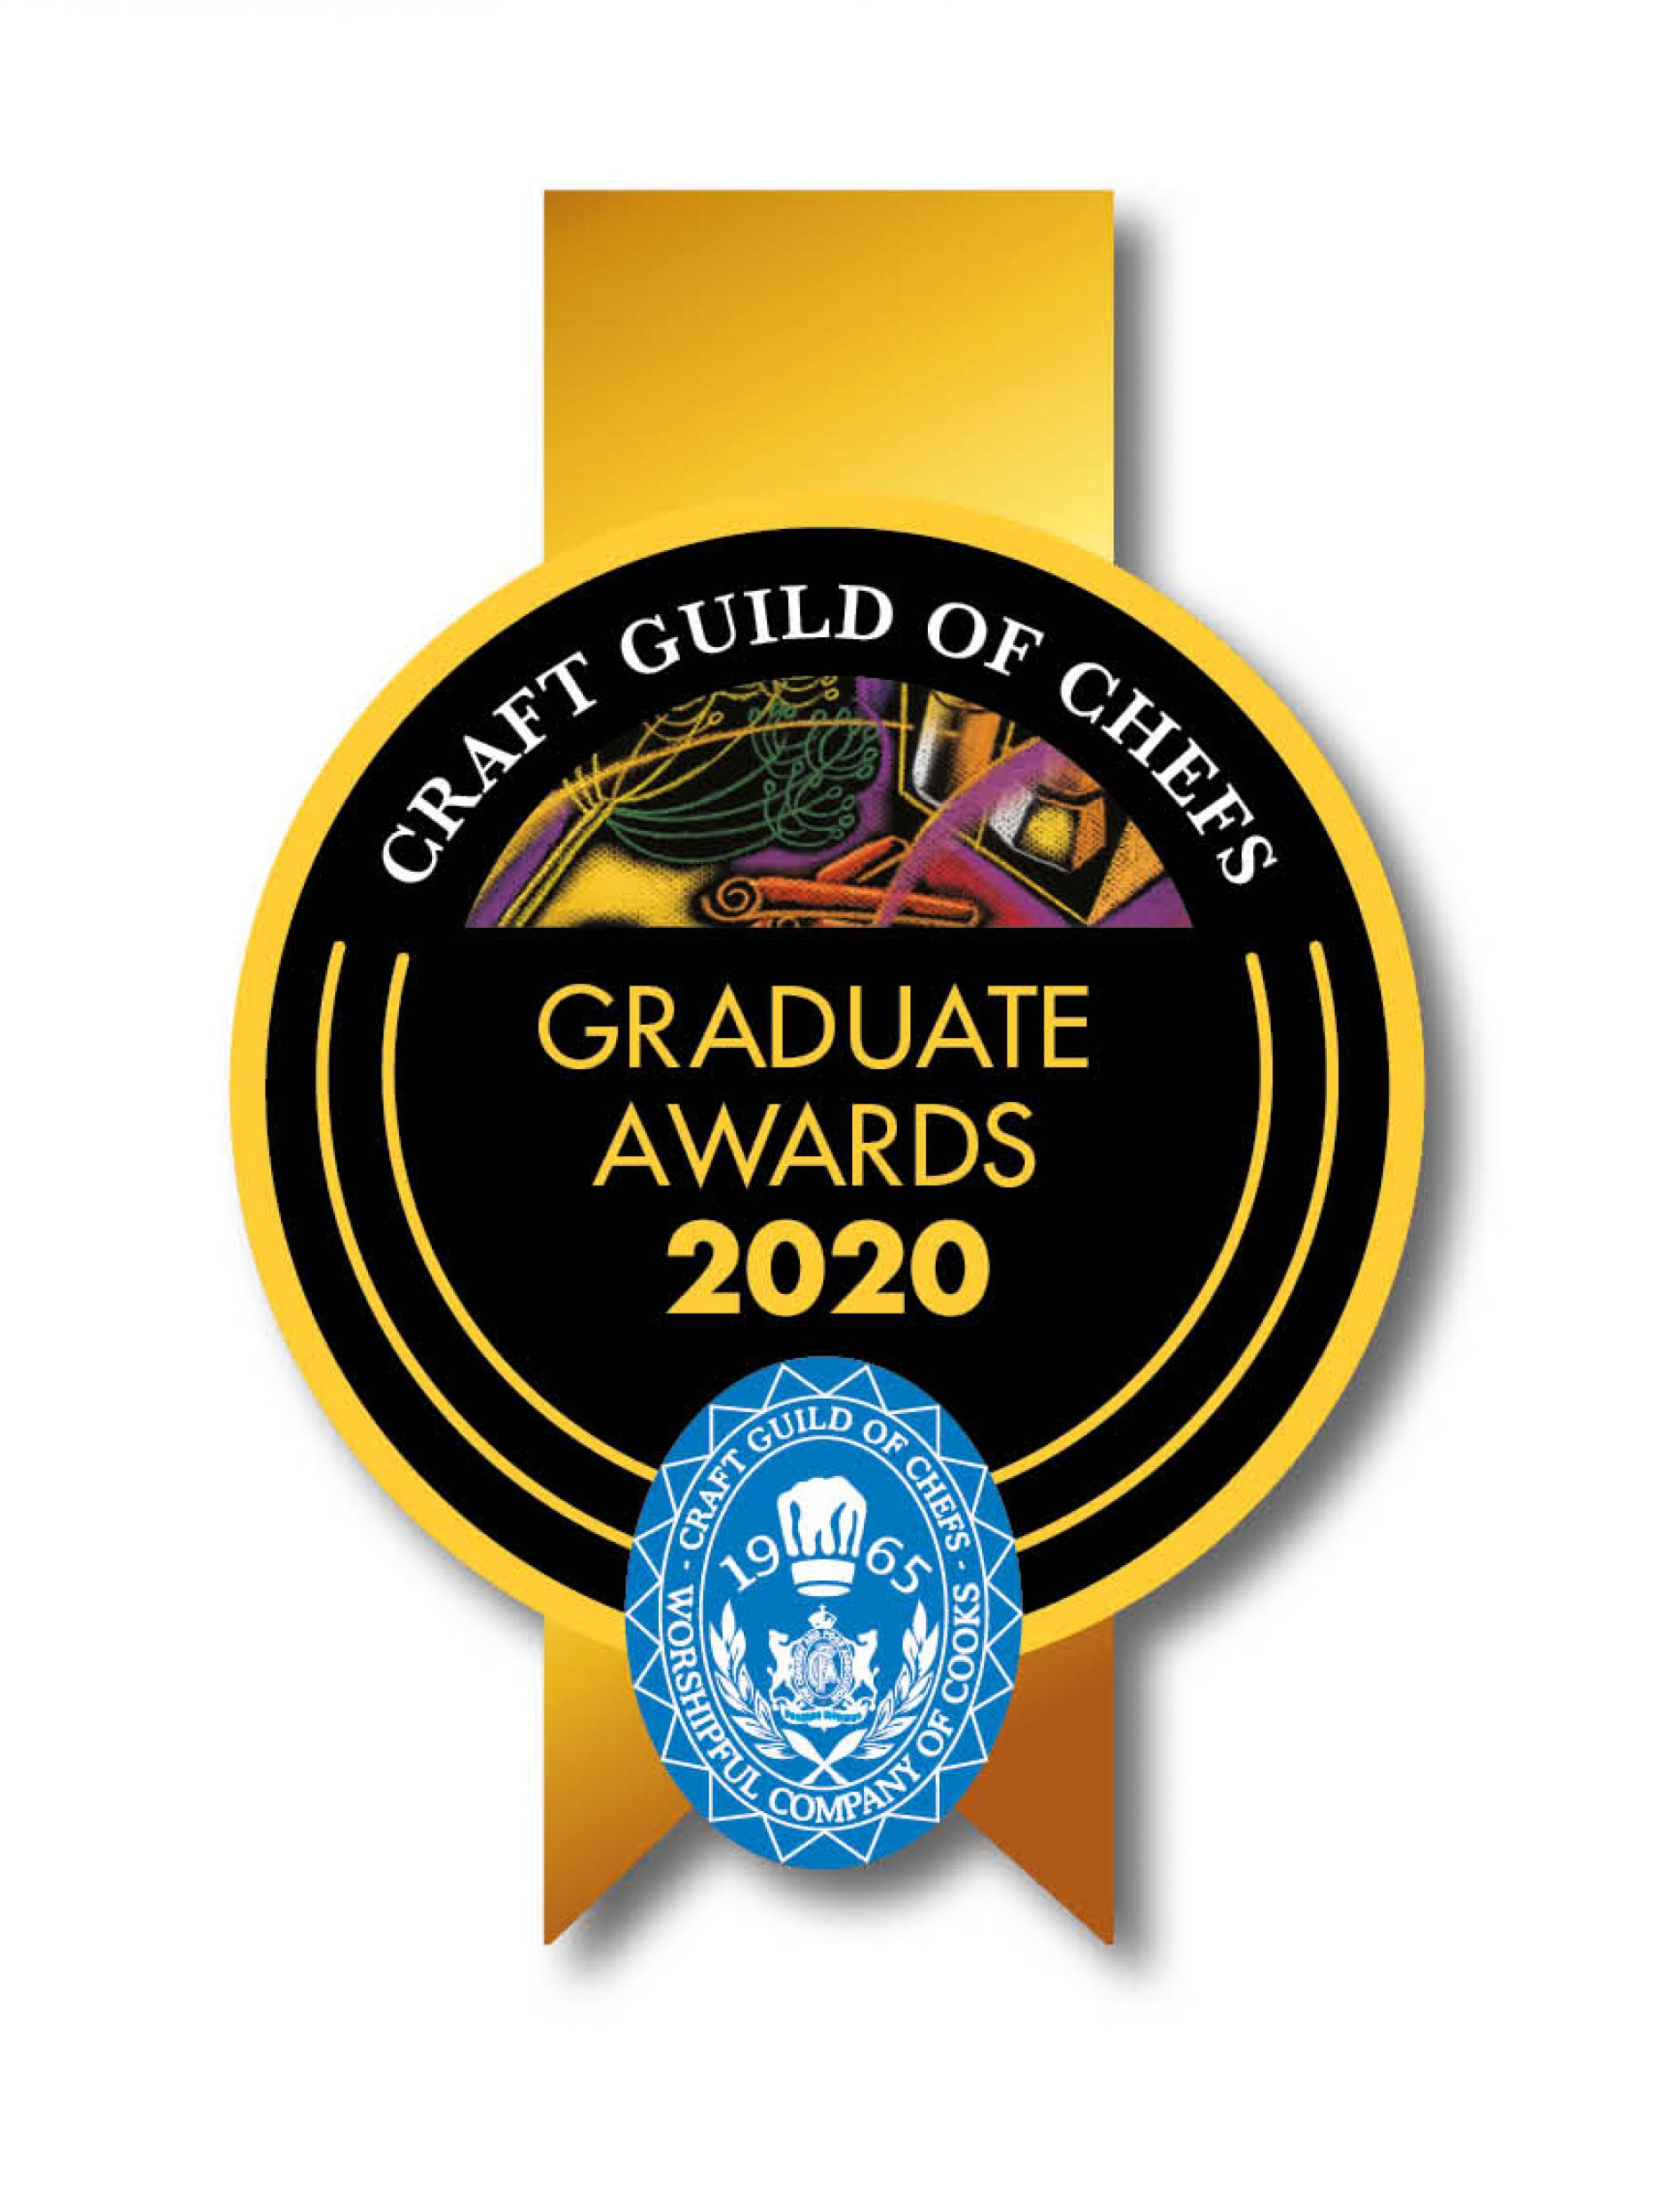 craft guild of chefs graduate awards 2020